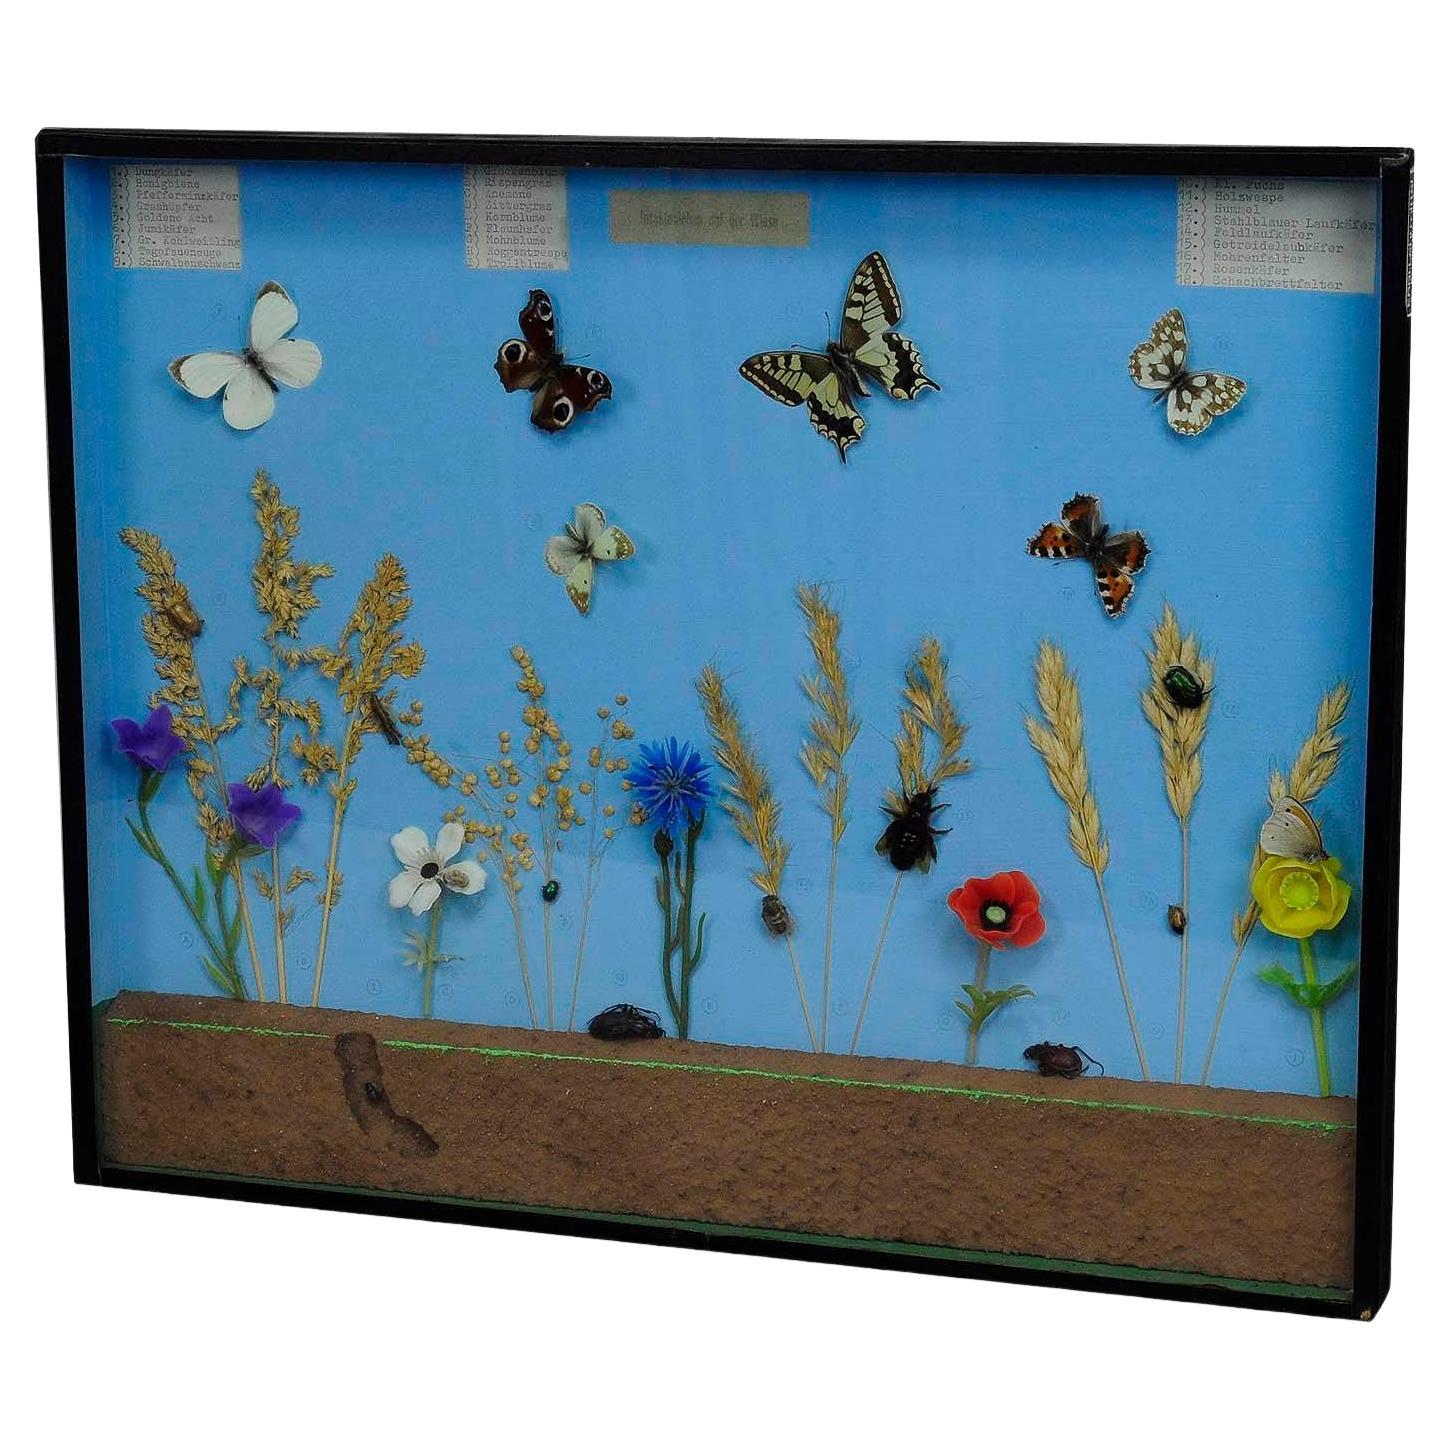 Great Vintage School Teaching Display of the Insects of the Grassland For Sale